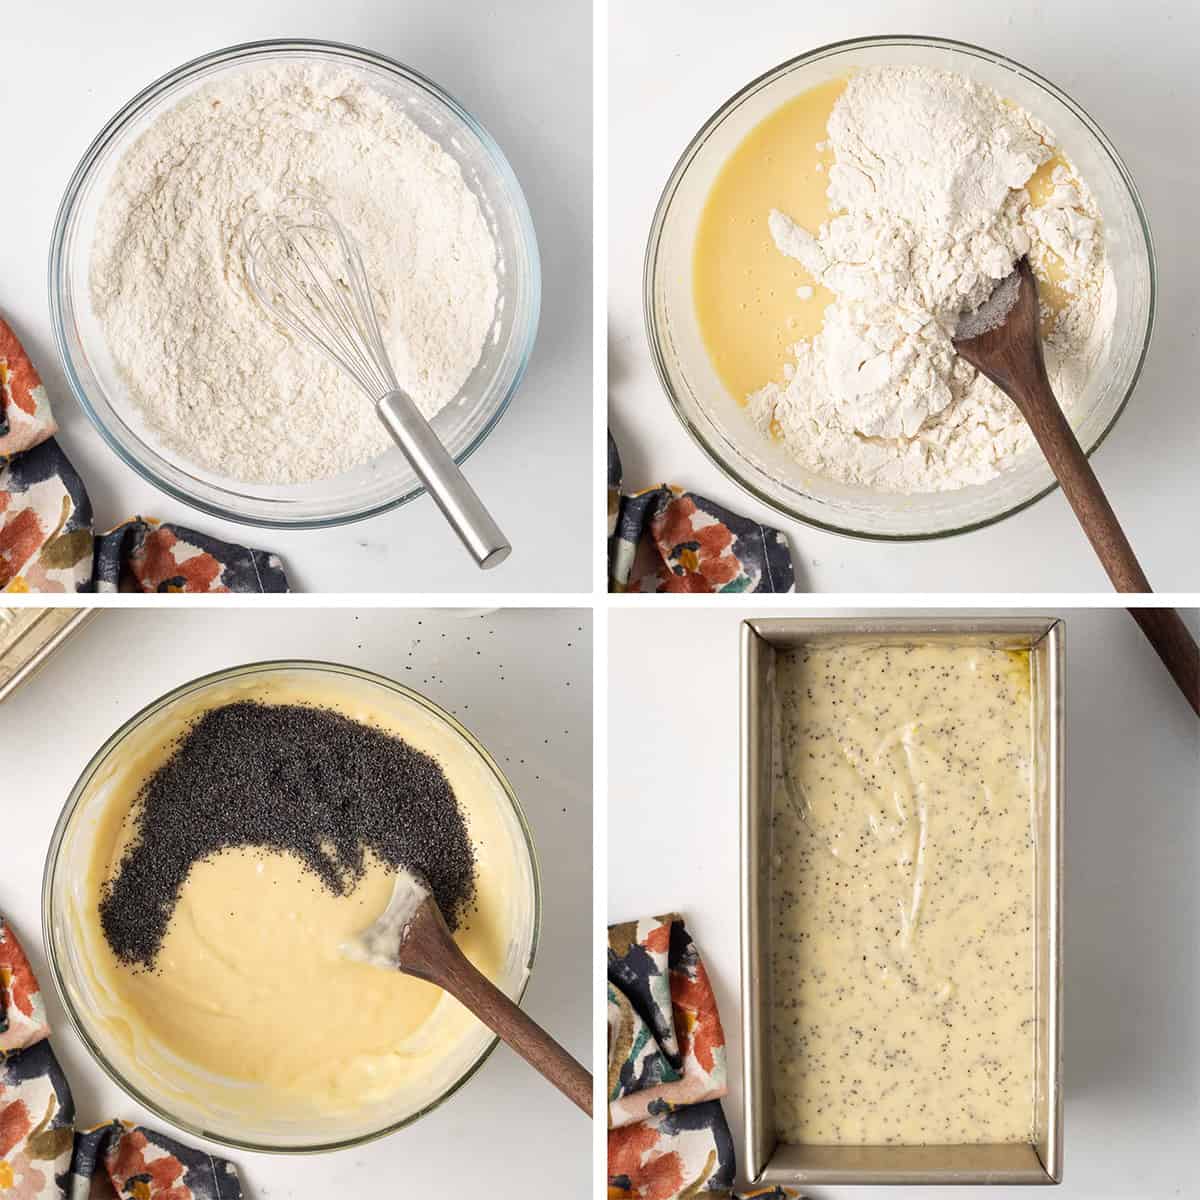 Four images of lemon poppy seed bread ingredients being combined in a bowl and in a loaf pan.